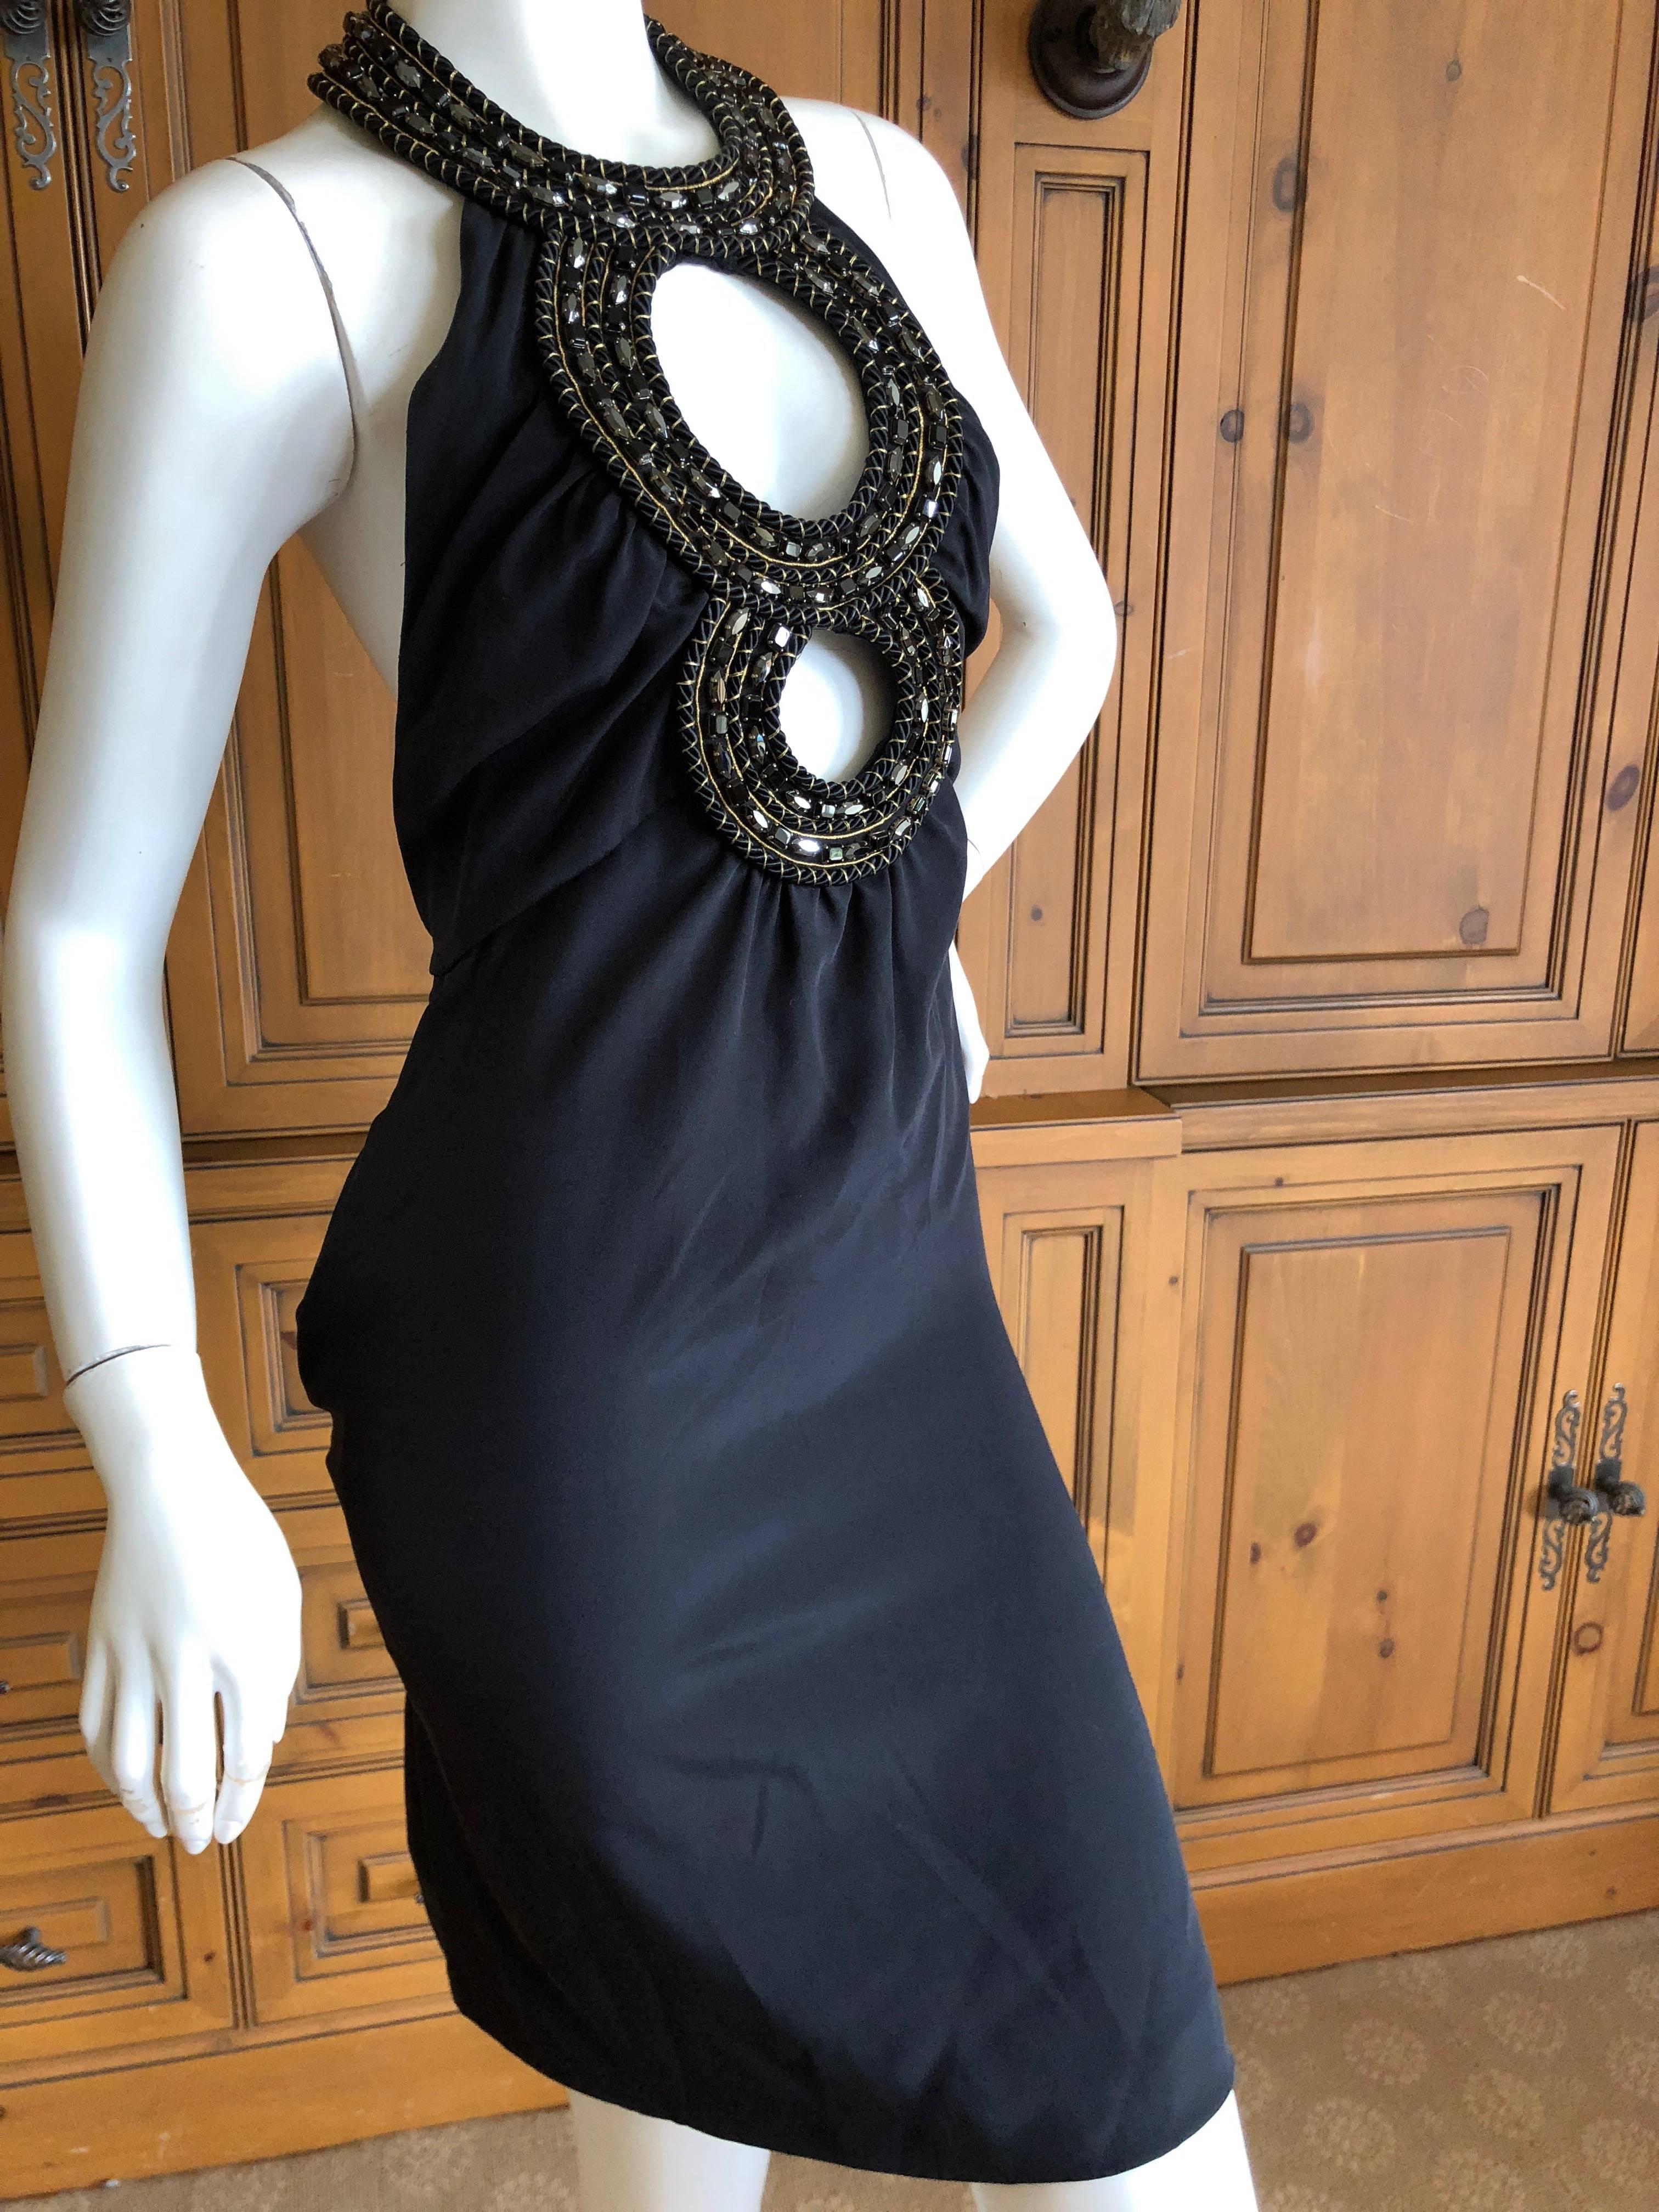 Azzaro Iconic Keyhole Backless Dress with Crystal and Cording Details For Sale 2